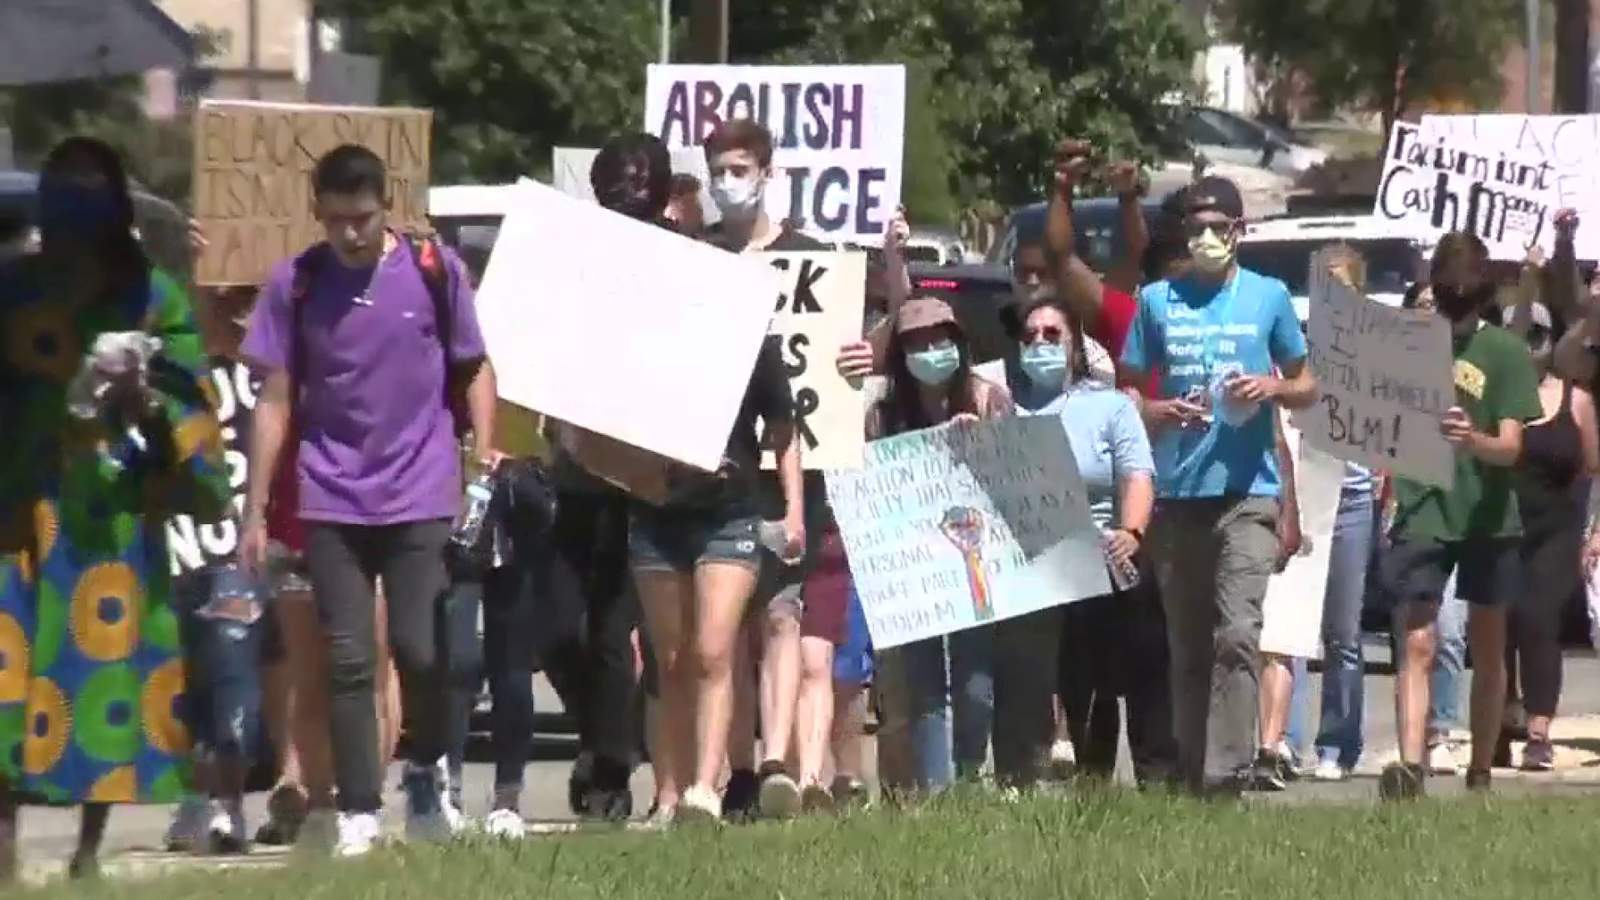 Protesters march in honor of former Taft HS student seriously hurt in Austin demonstration